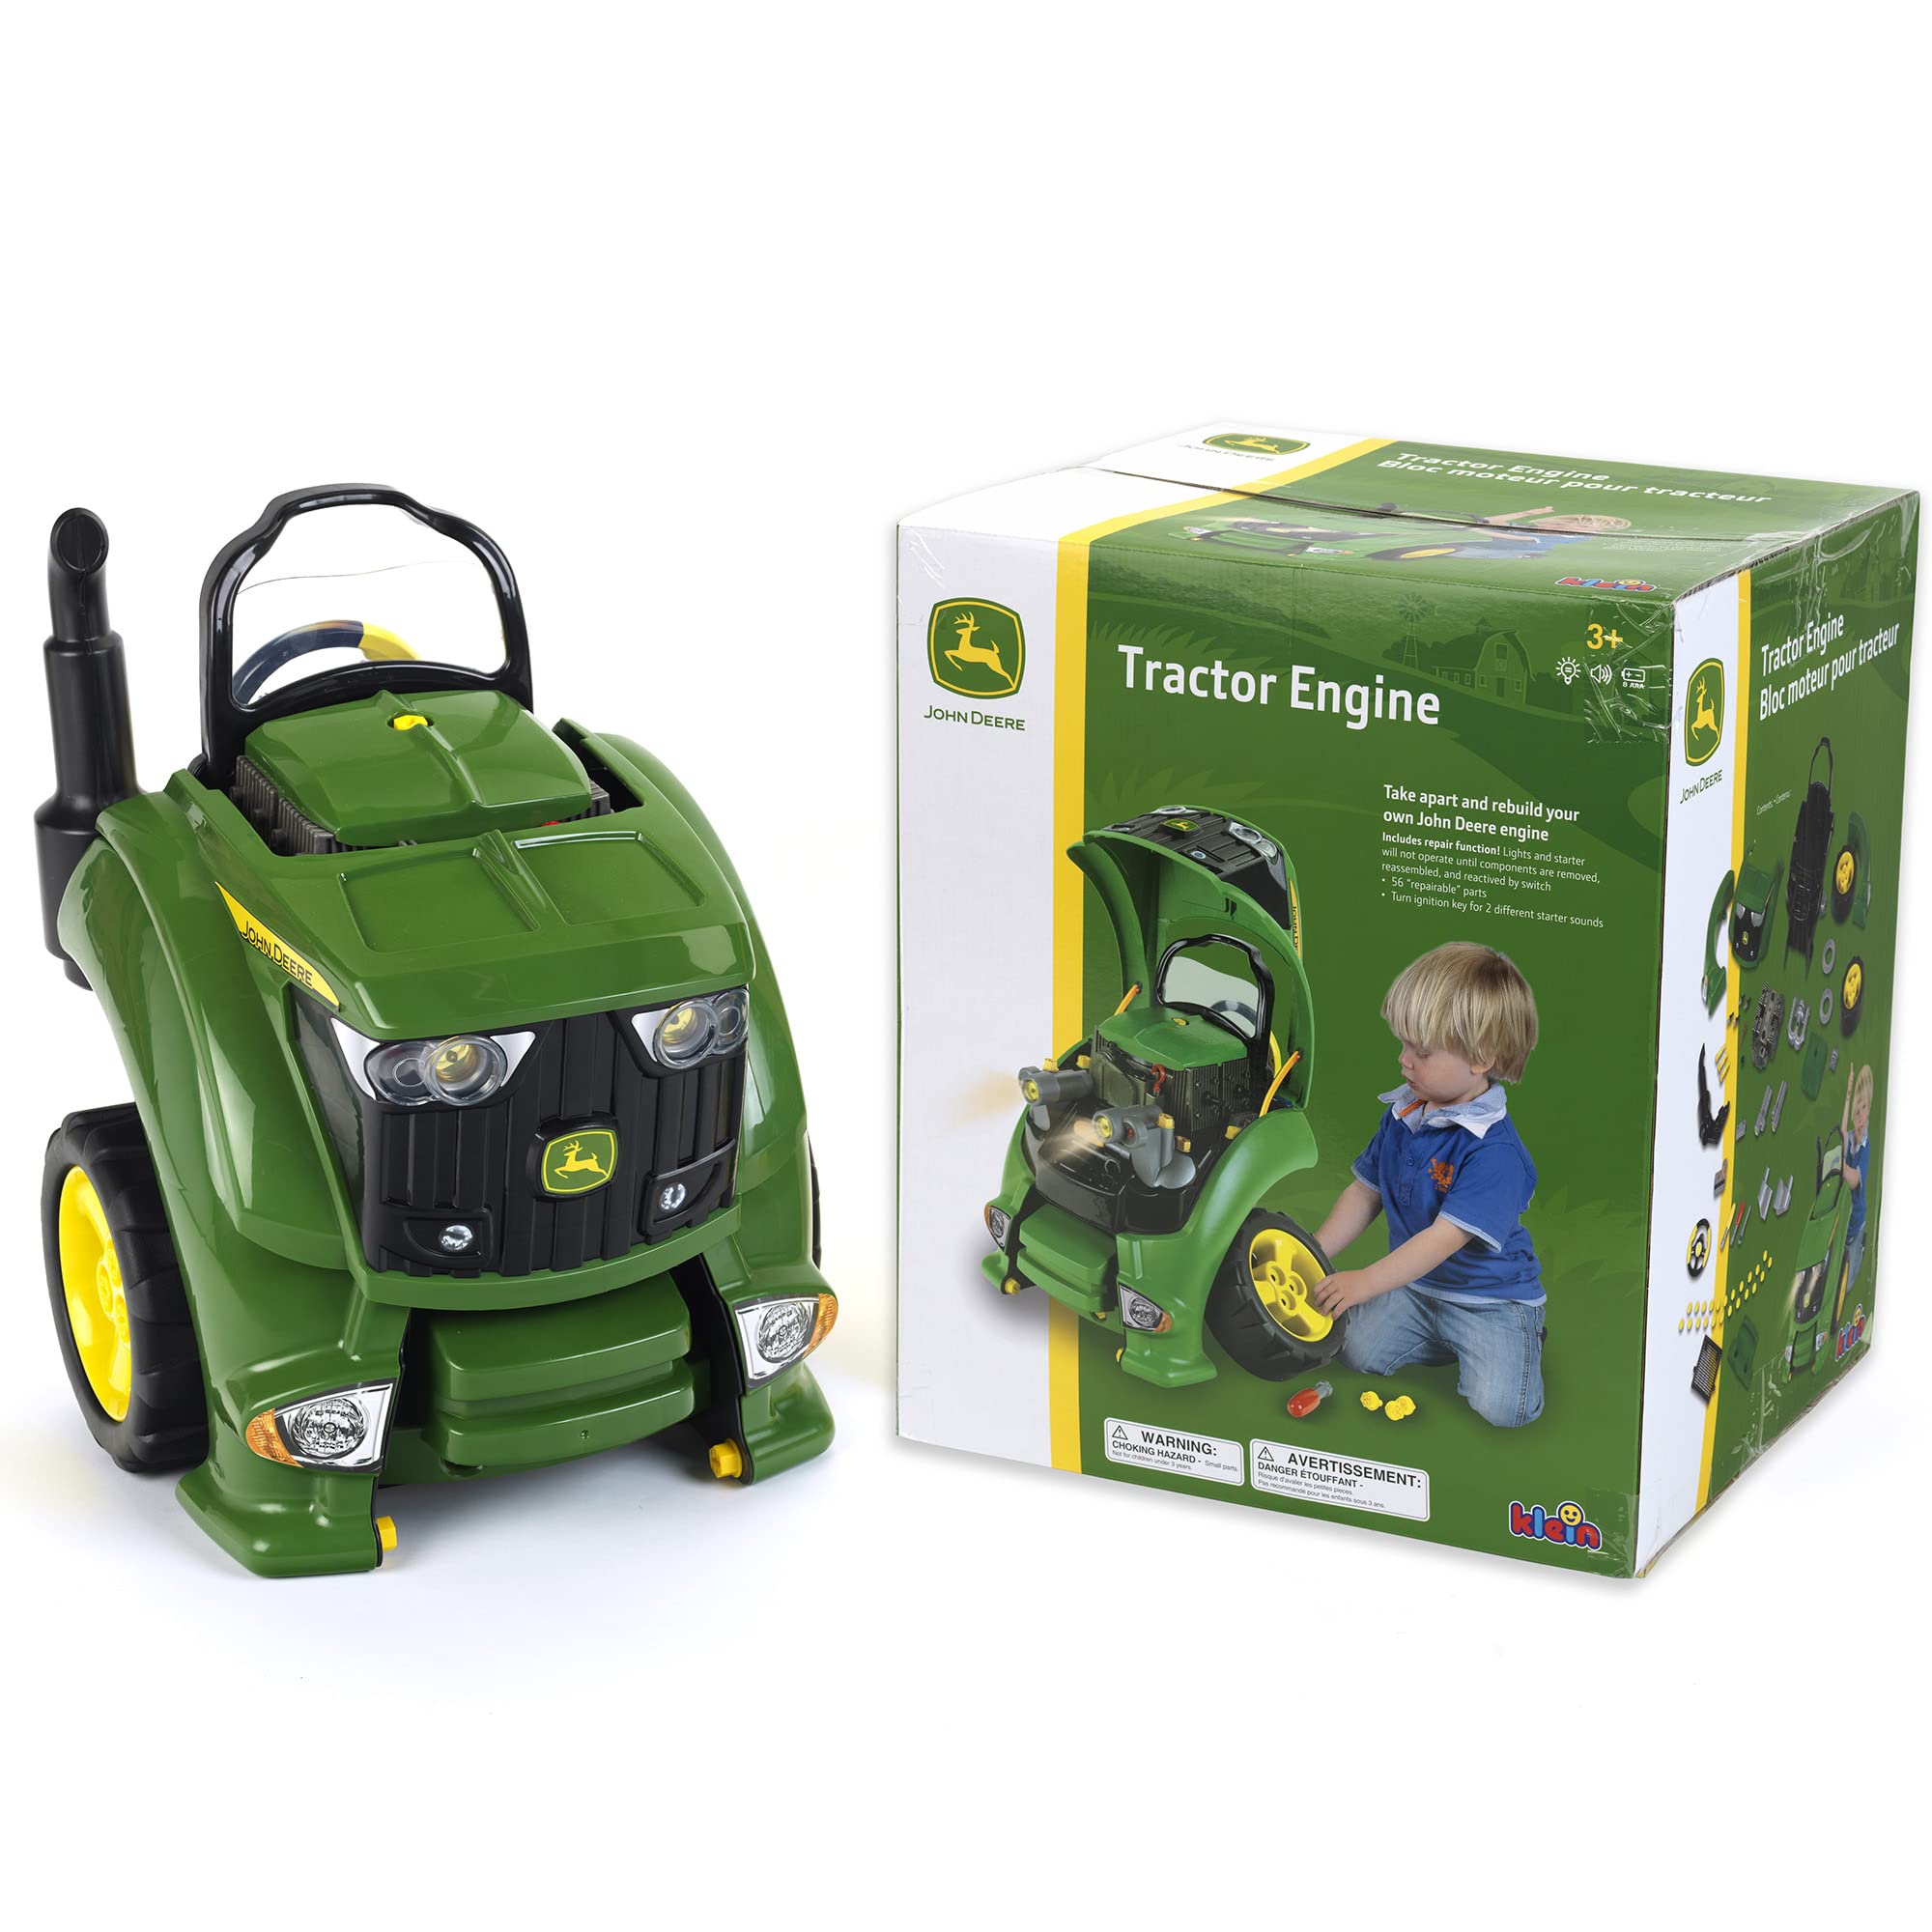 Klein Theo John Deere Engine Premium Toys for Kids Ages 3 Years & Up